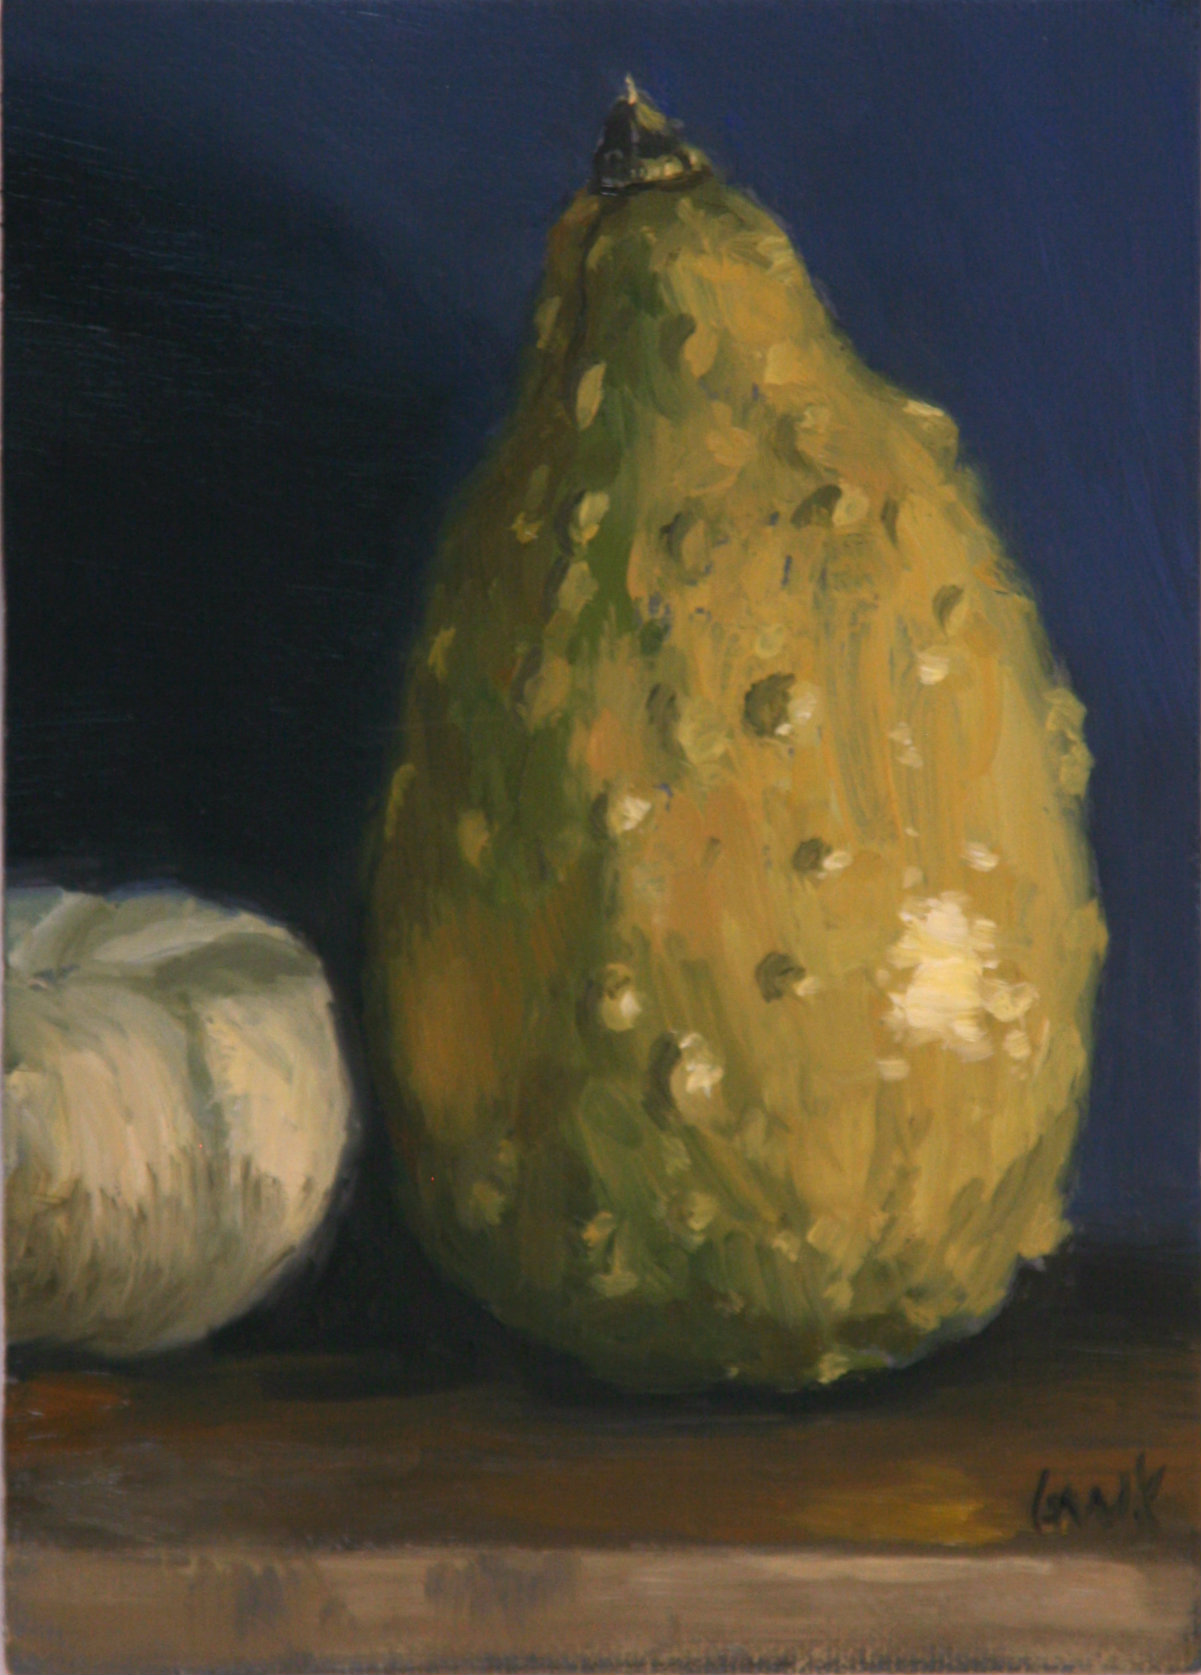 1-20-14 Two Gourds